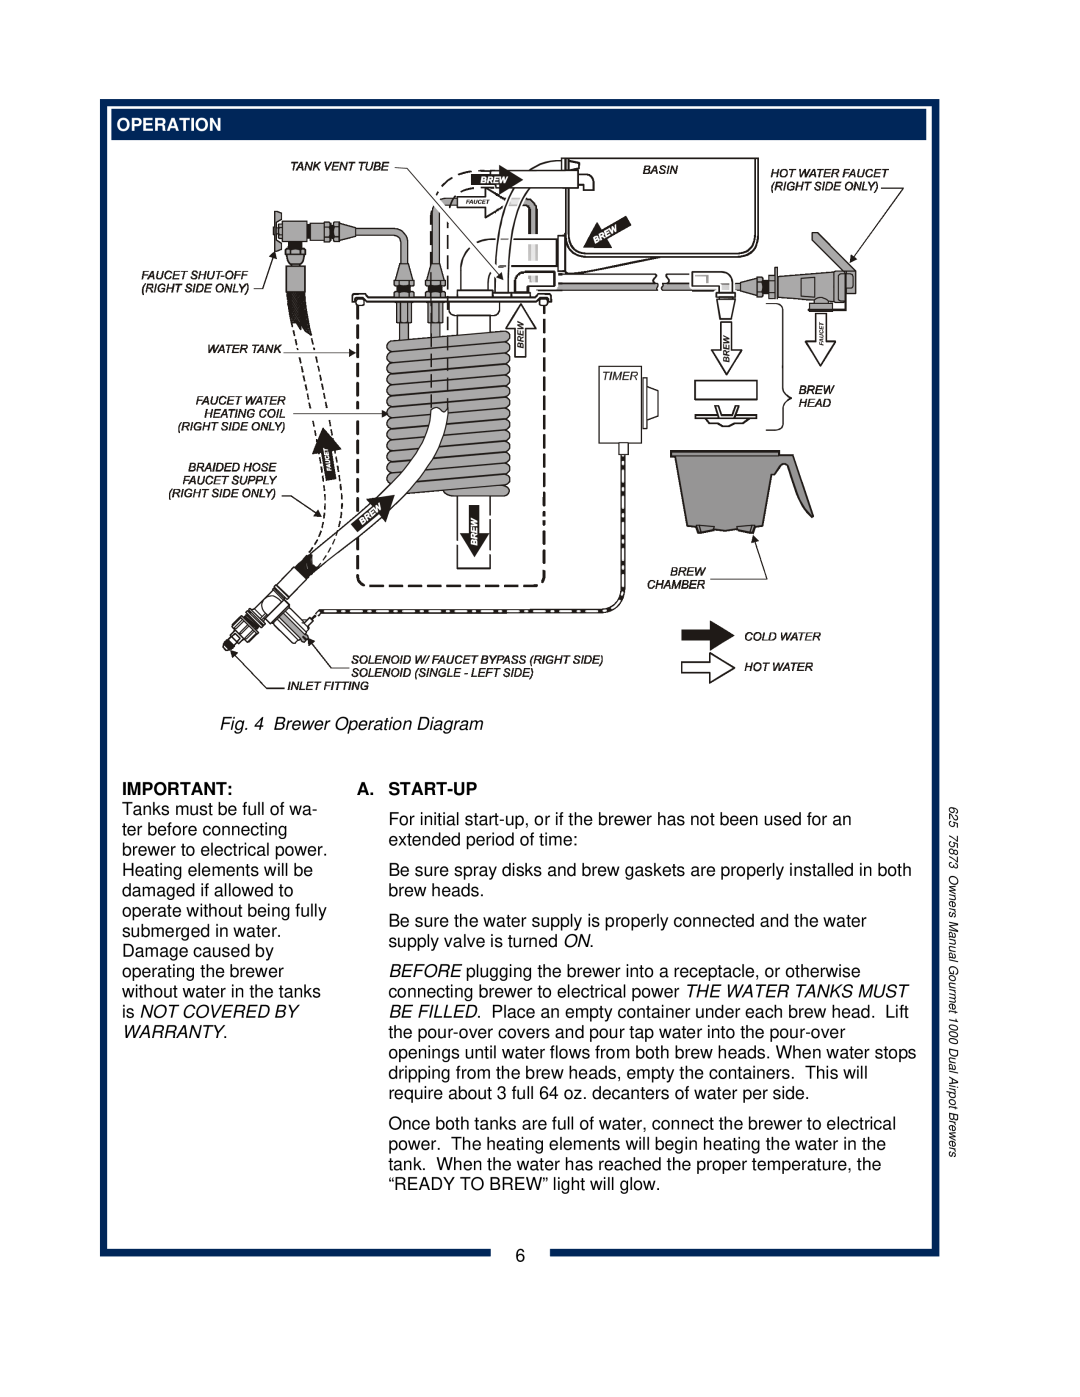 Bloomfield 8792 owner manual Brewer Operation Diagram, A.Start-Up 